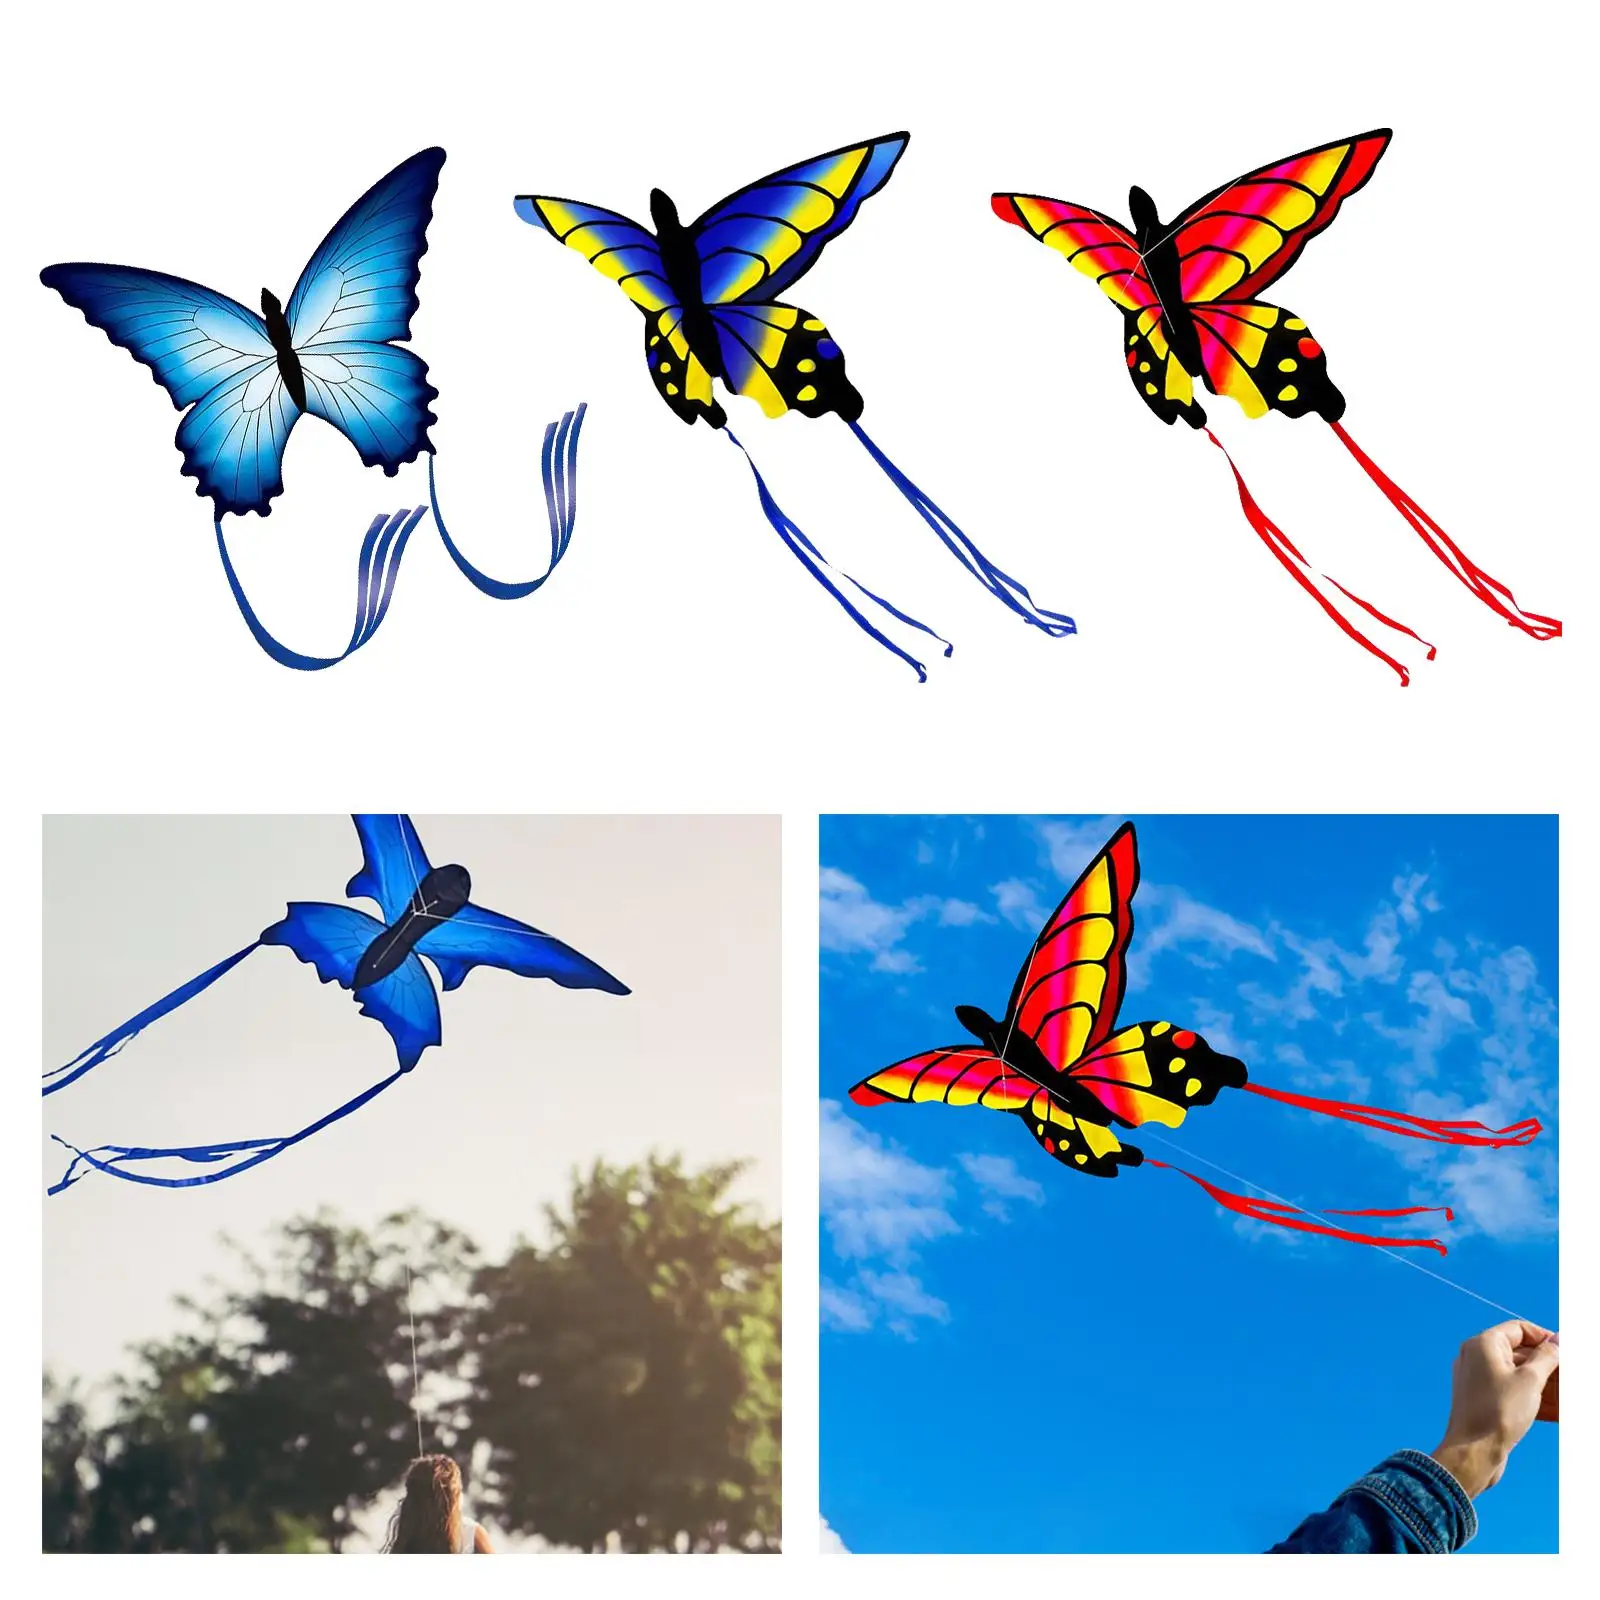 Funny Butterfly Kite Flying Toys, Outdoor Sports, Toys, Beach Park Activity, Playing Games, for Children Kids Gifts